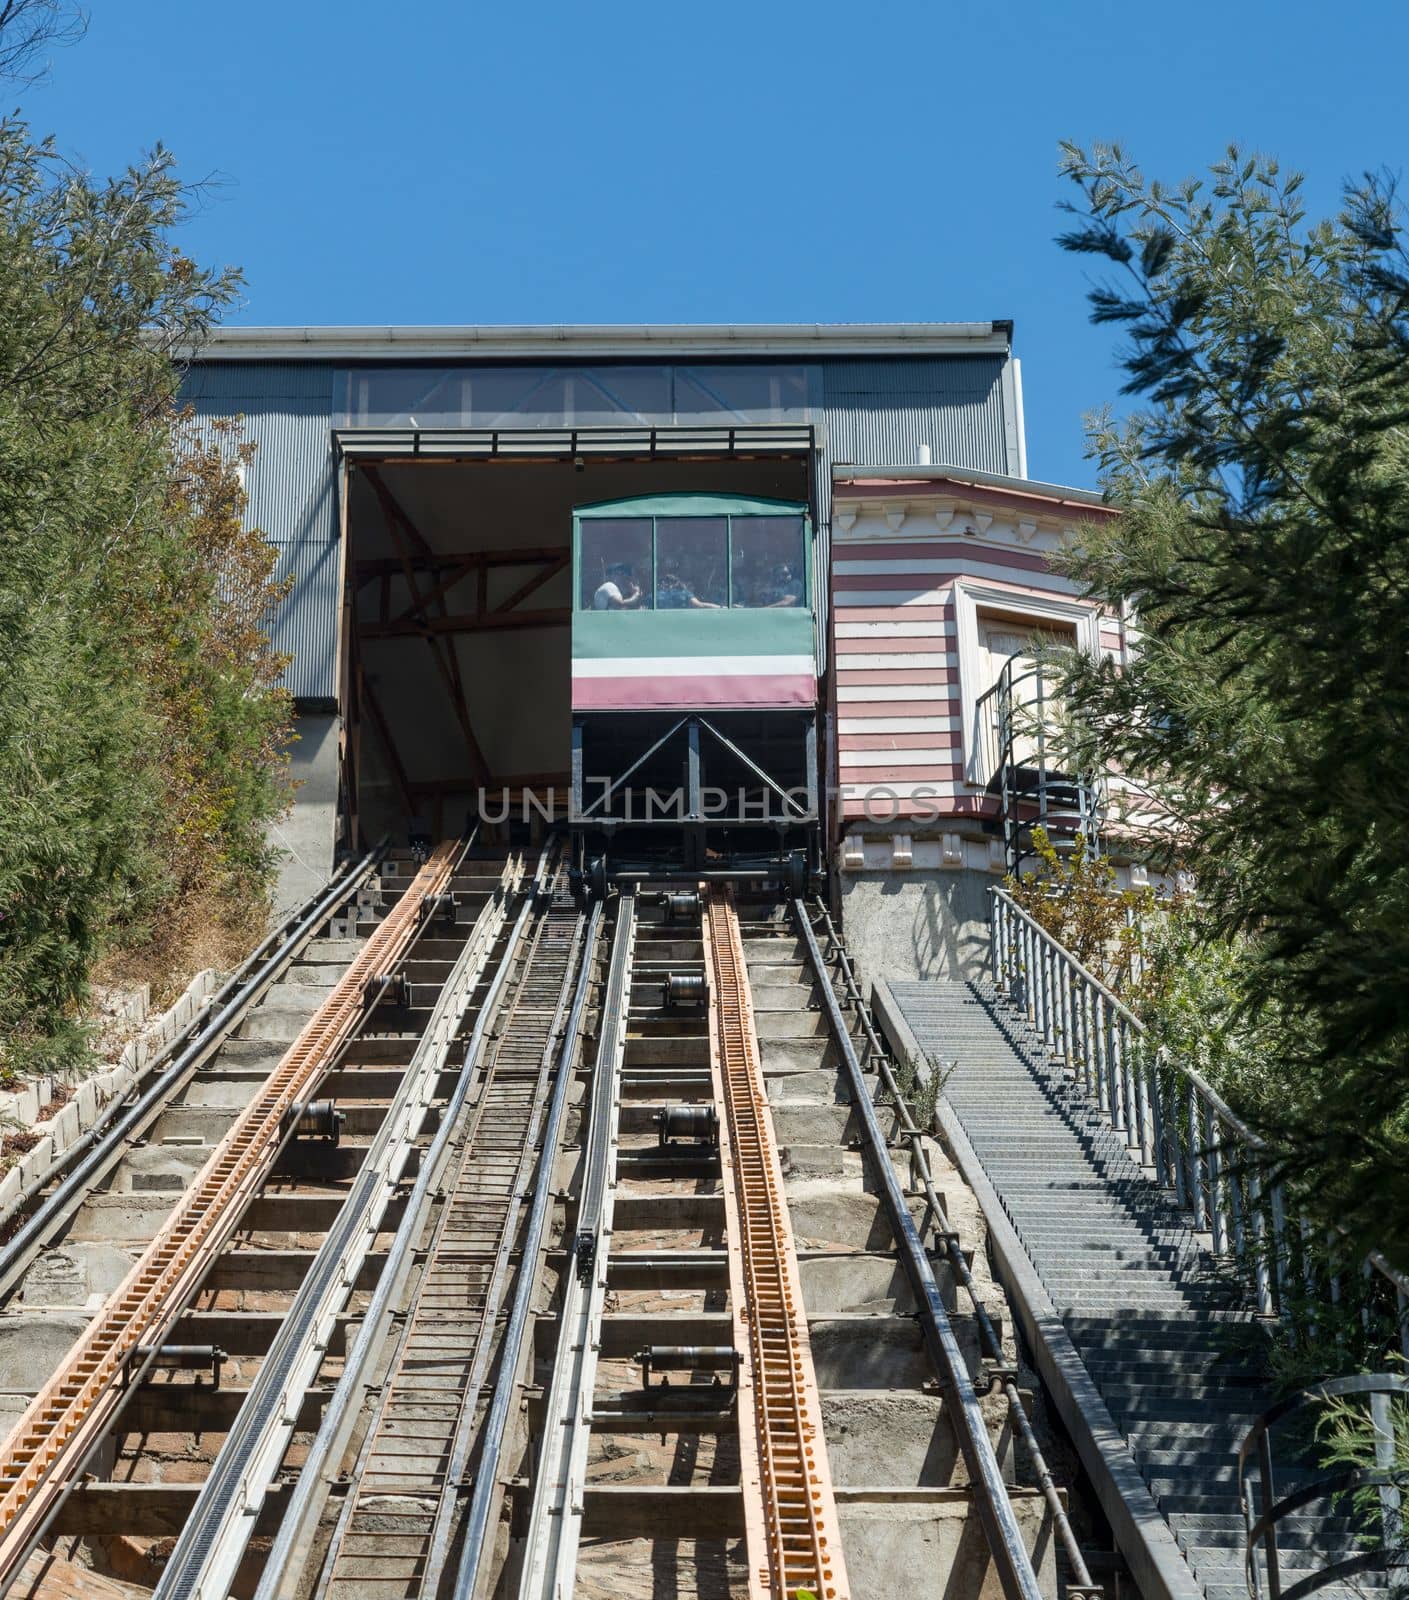 Car leaving the upper station of Funicular railway in Valparaiso Chile